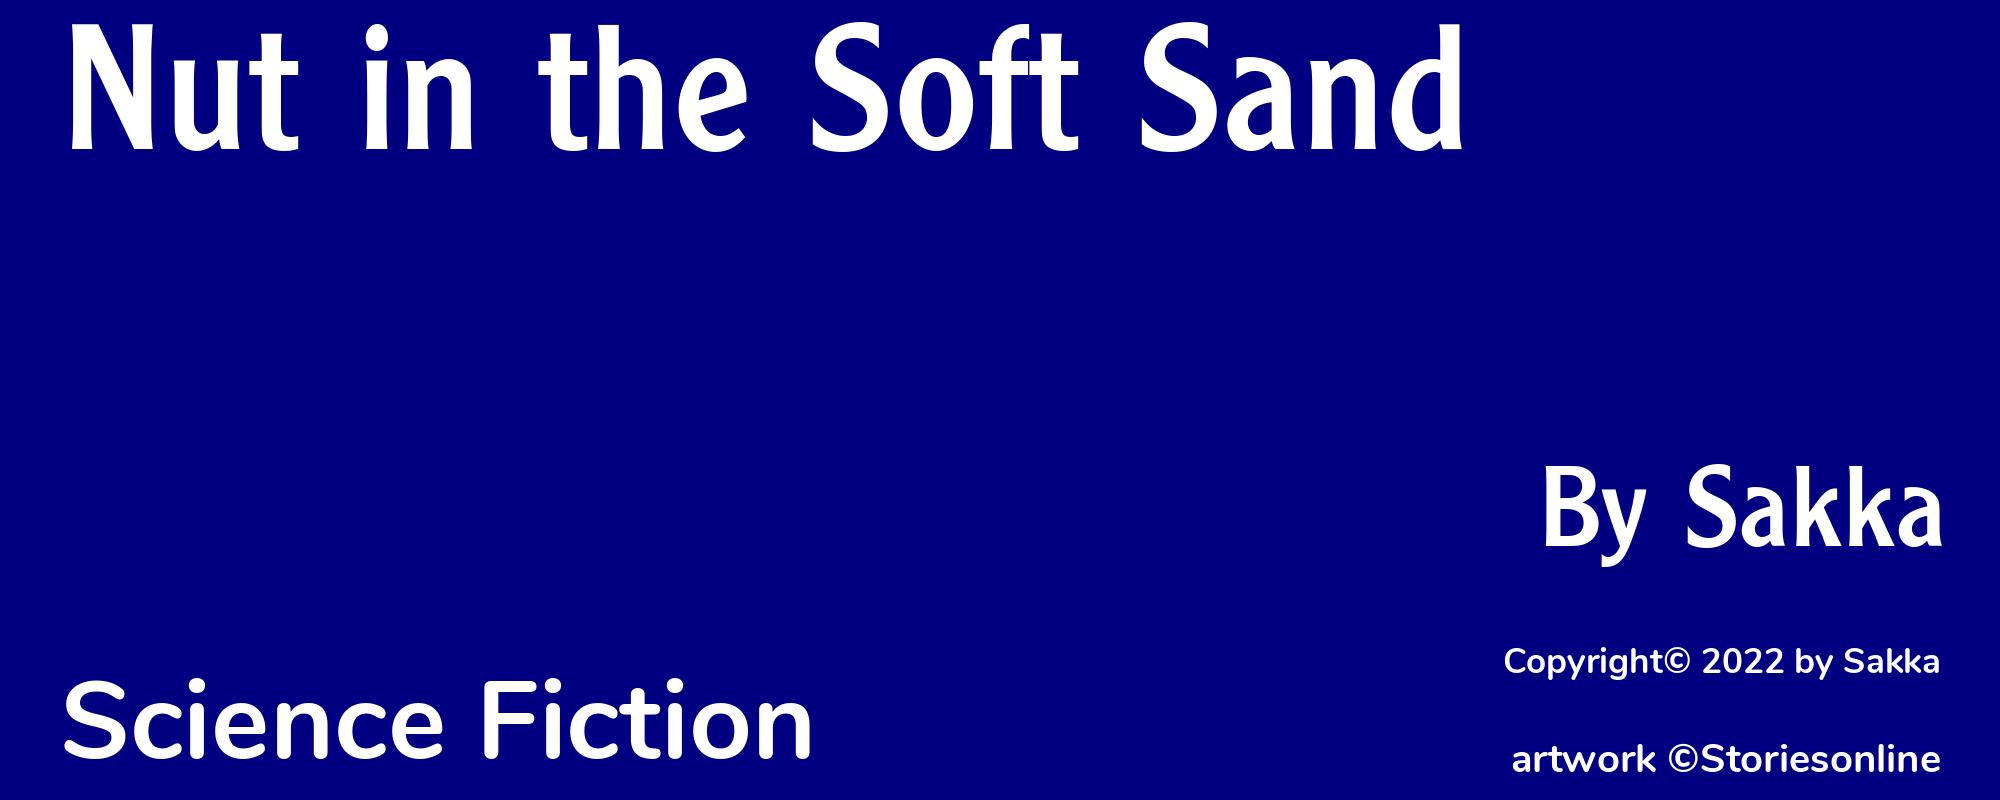 Nut in the Soft Sand - Cover